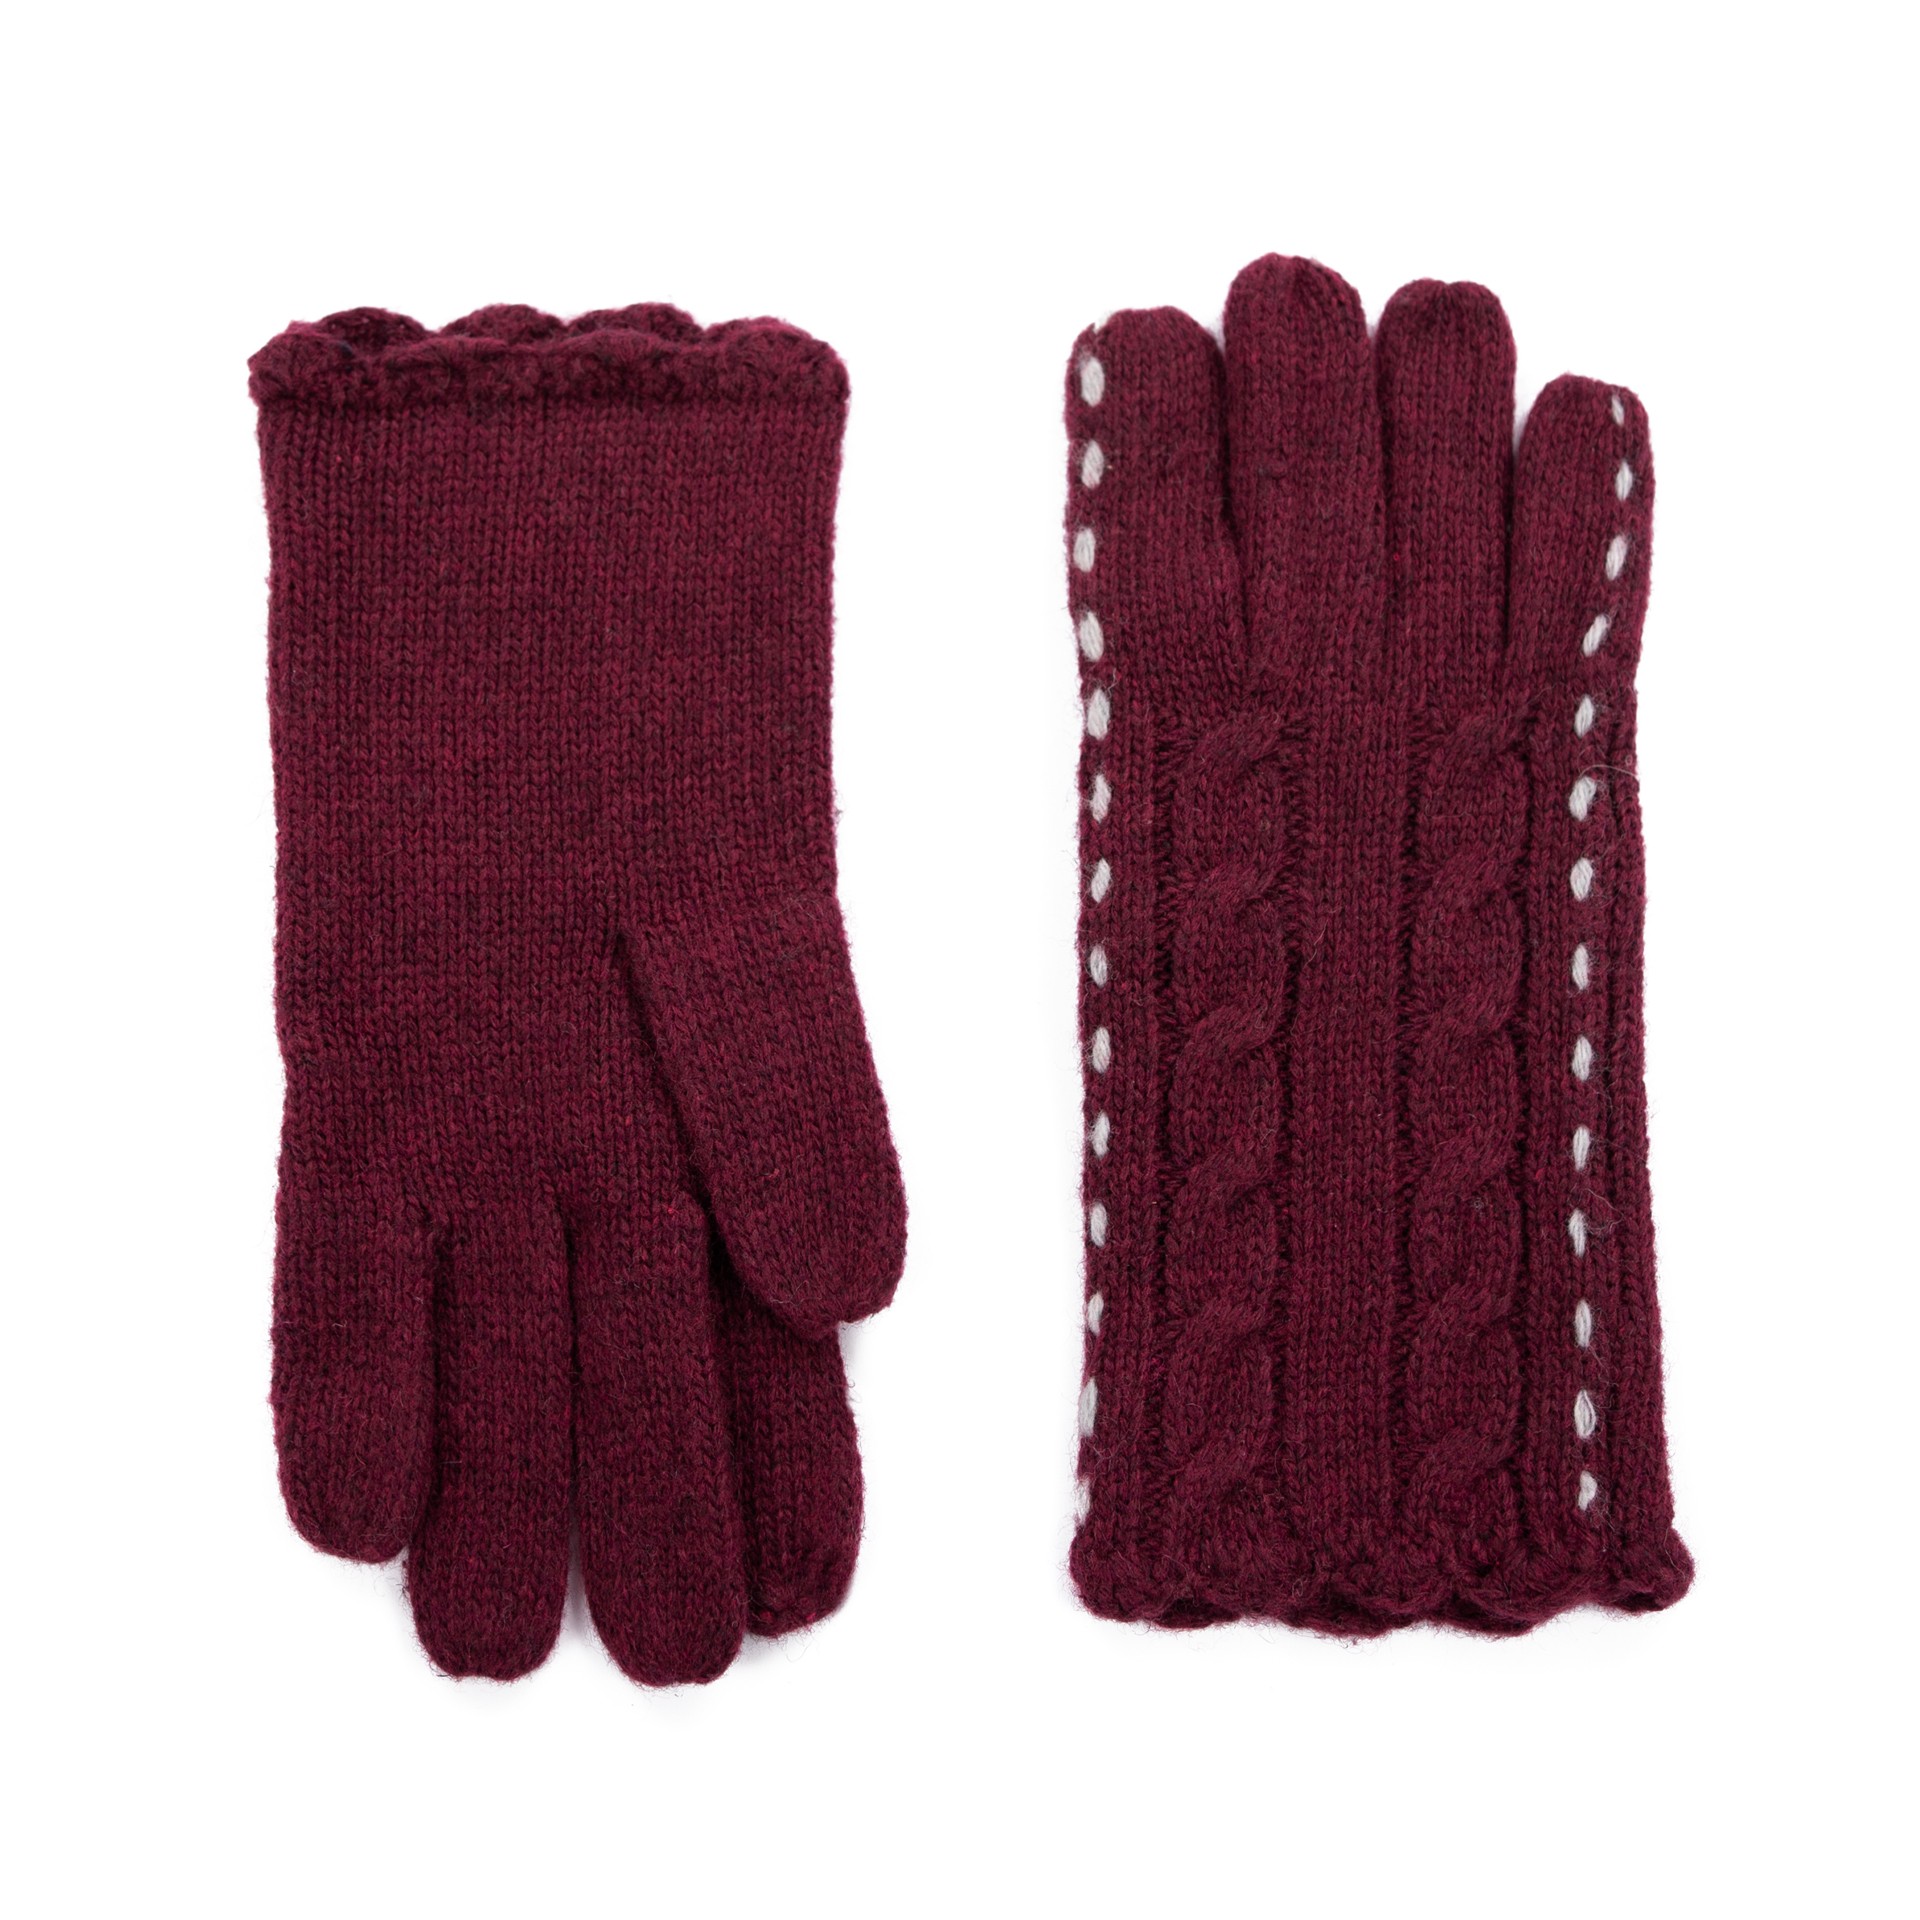 Art Of Polo Woman's Gloves rk13153-6